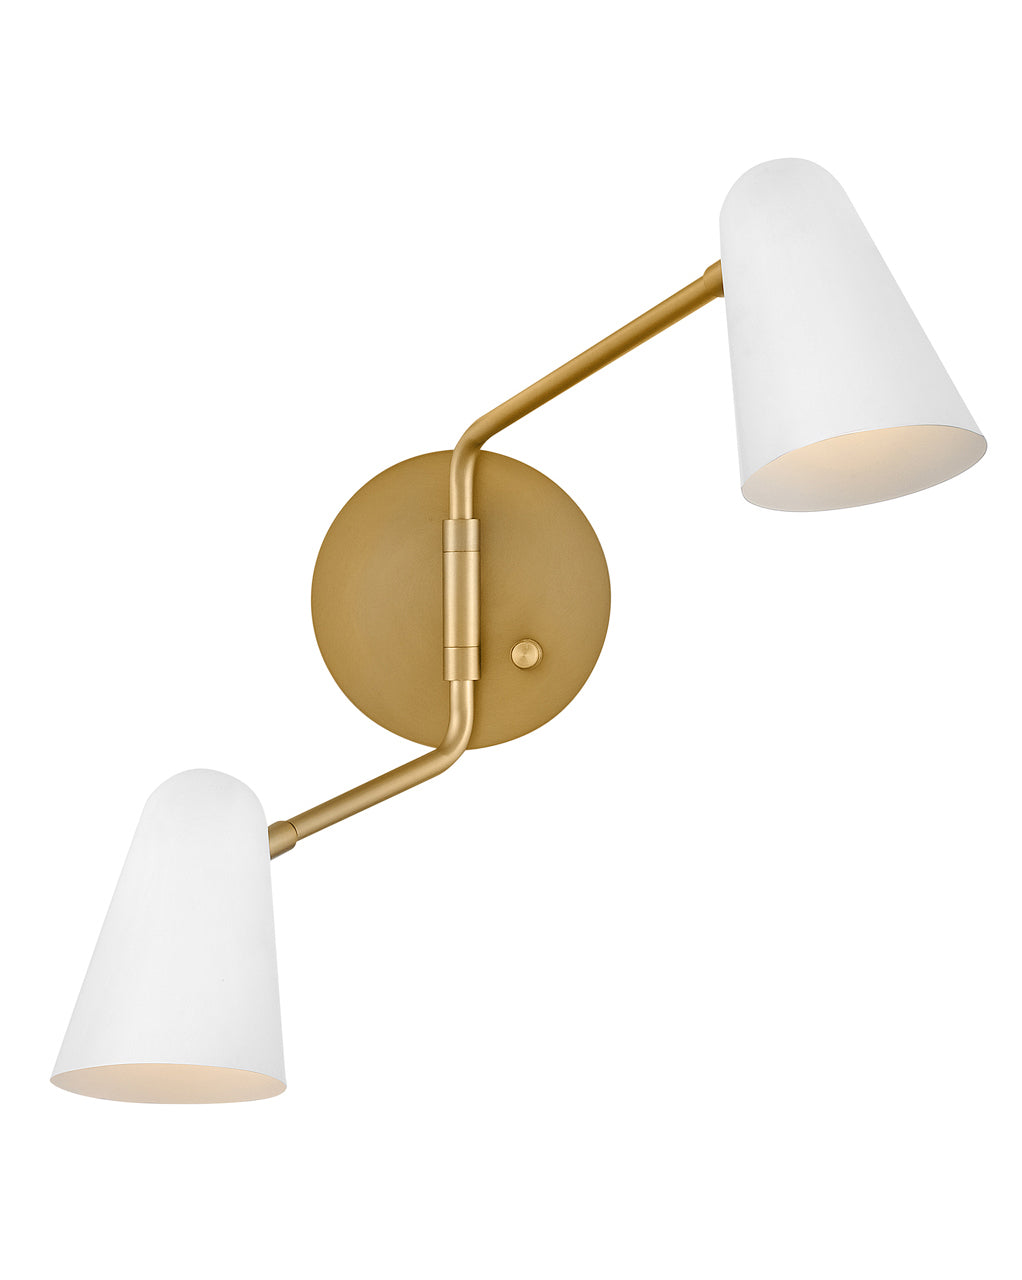 Lark Birdie Two Light Sconce Wall Light Fixtures Lark 10.5x22.75x16.5 Lacquered Brass with Matte White accents 